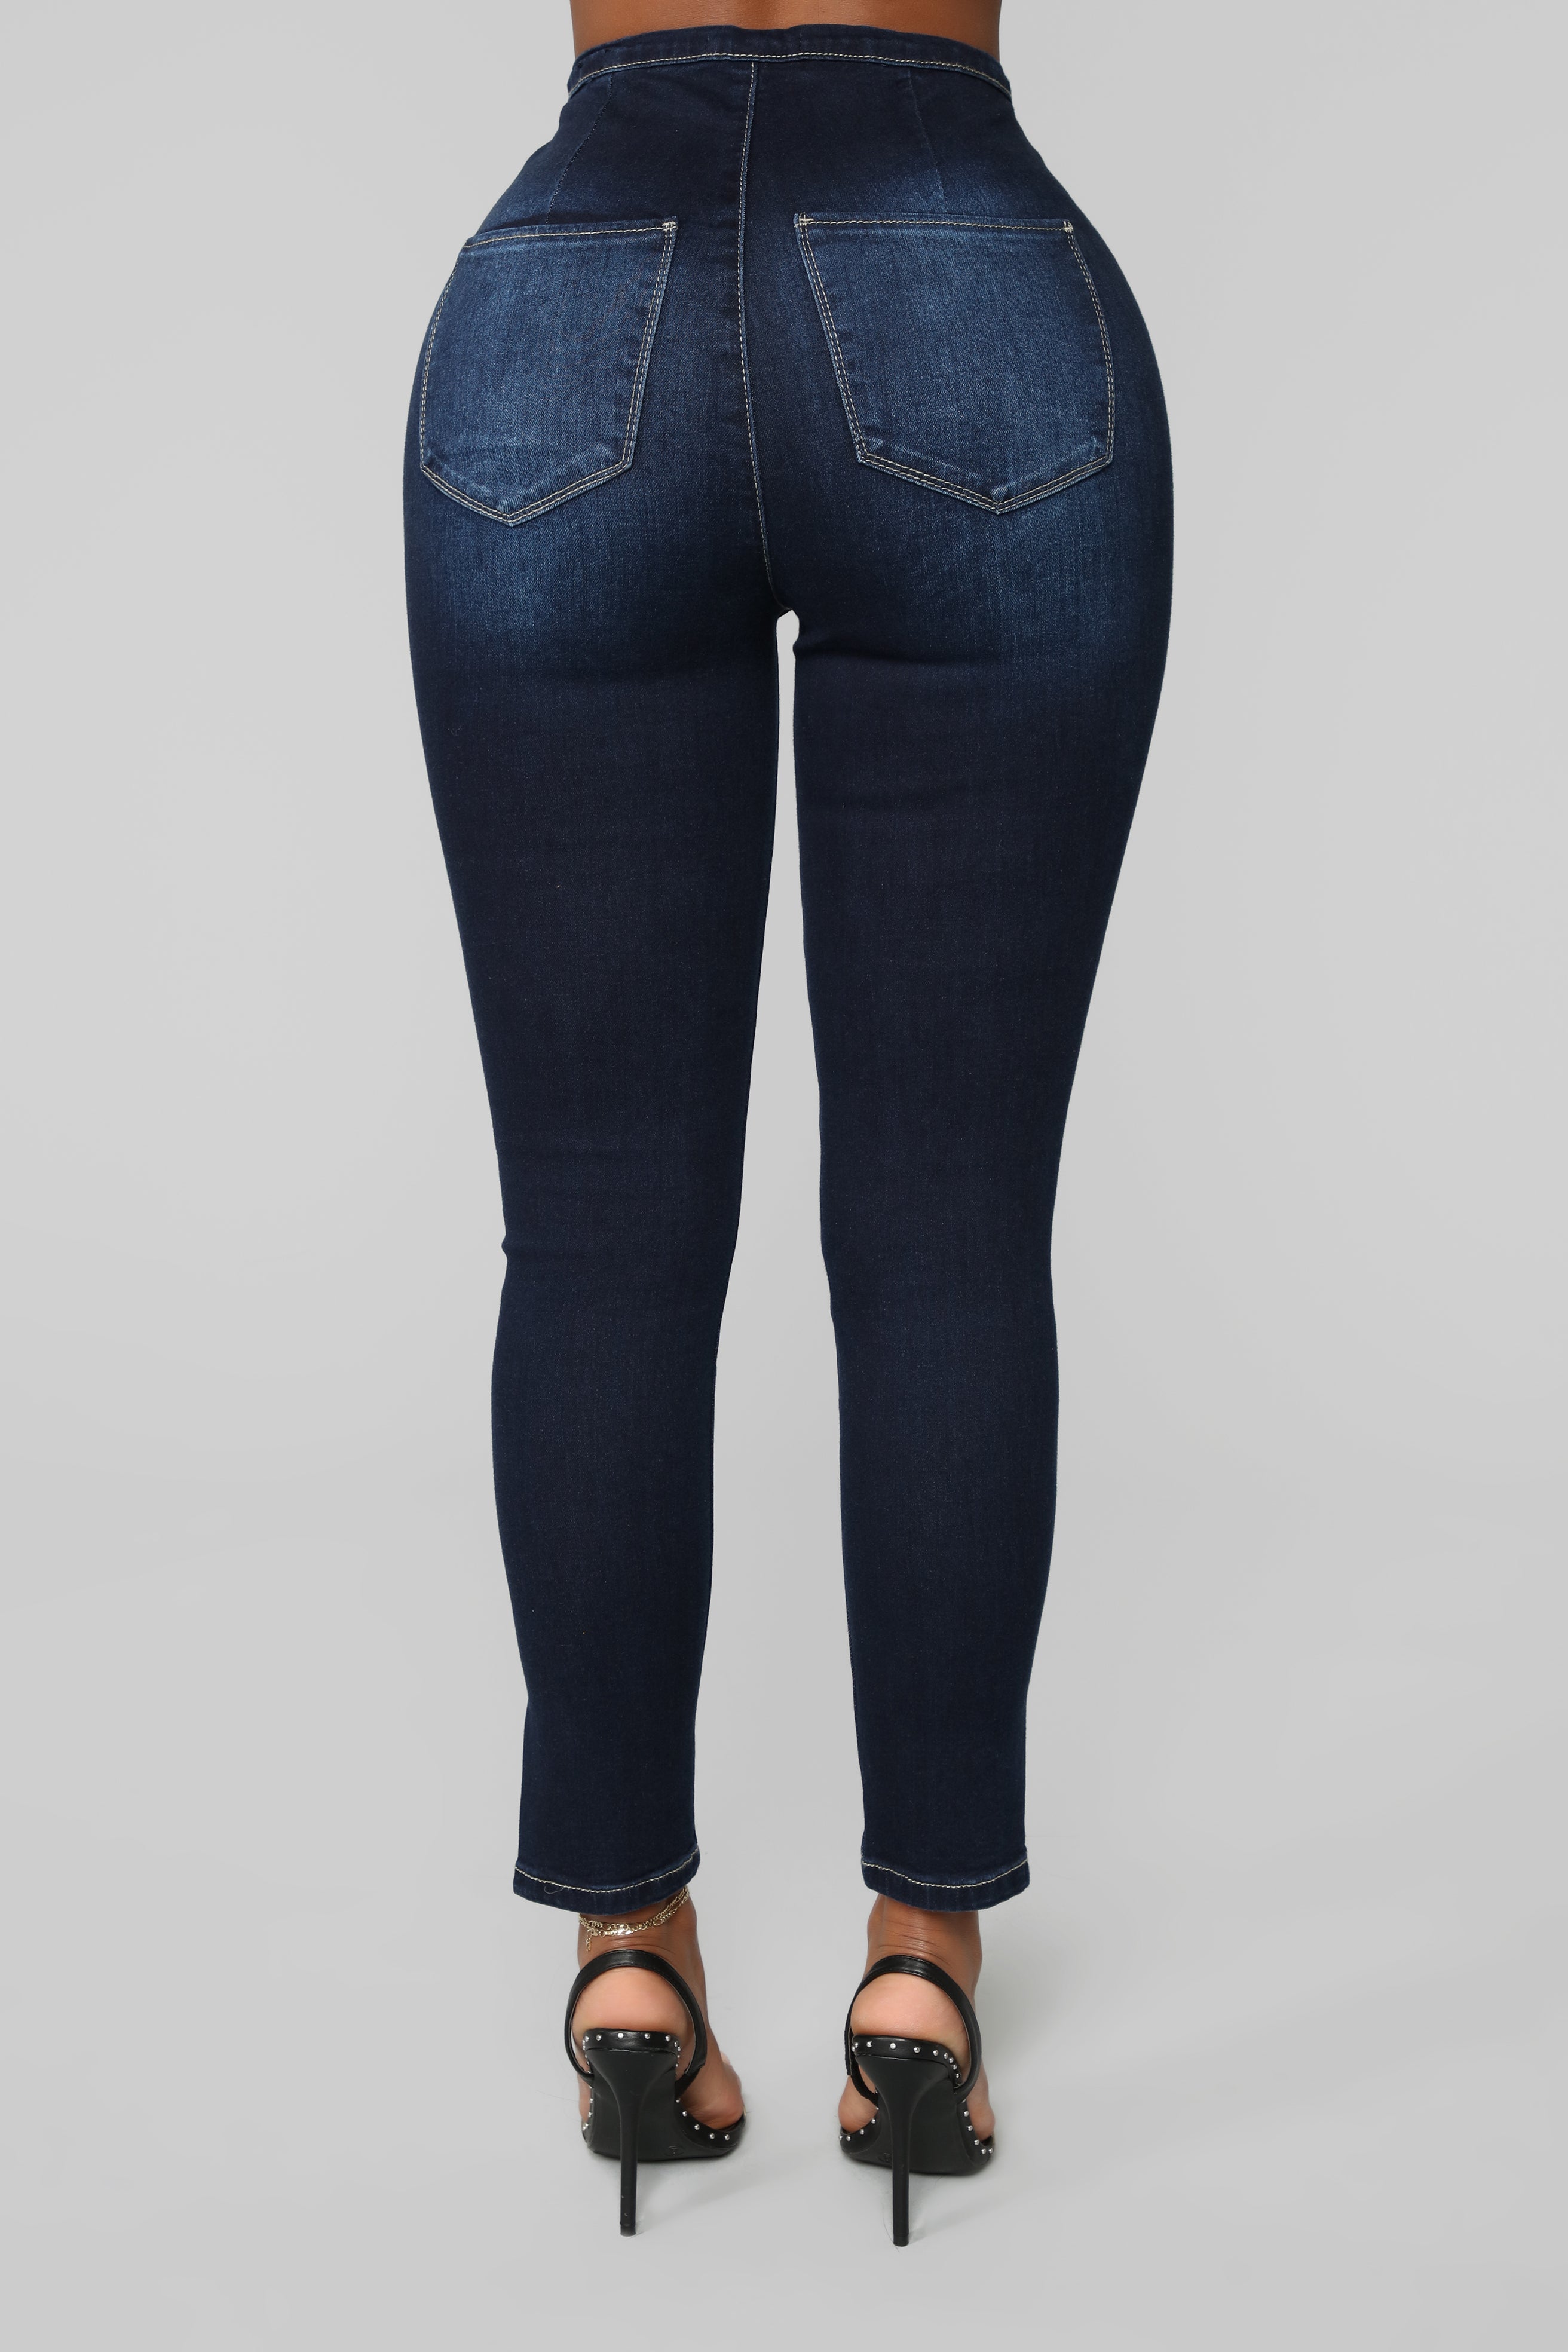 Hot And Ready High Rise Ankle Jeans - Dark Denim